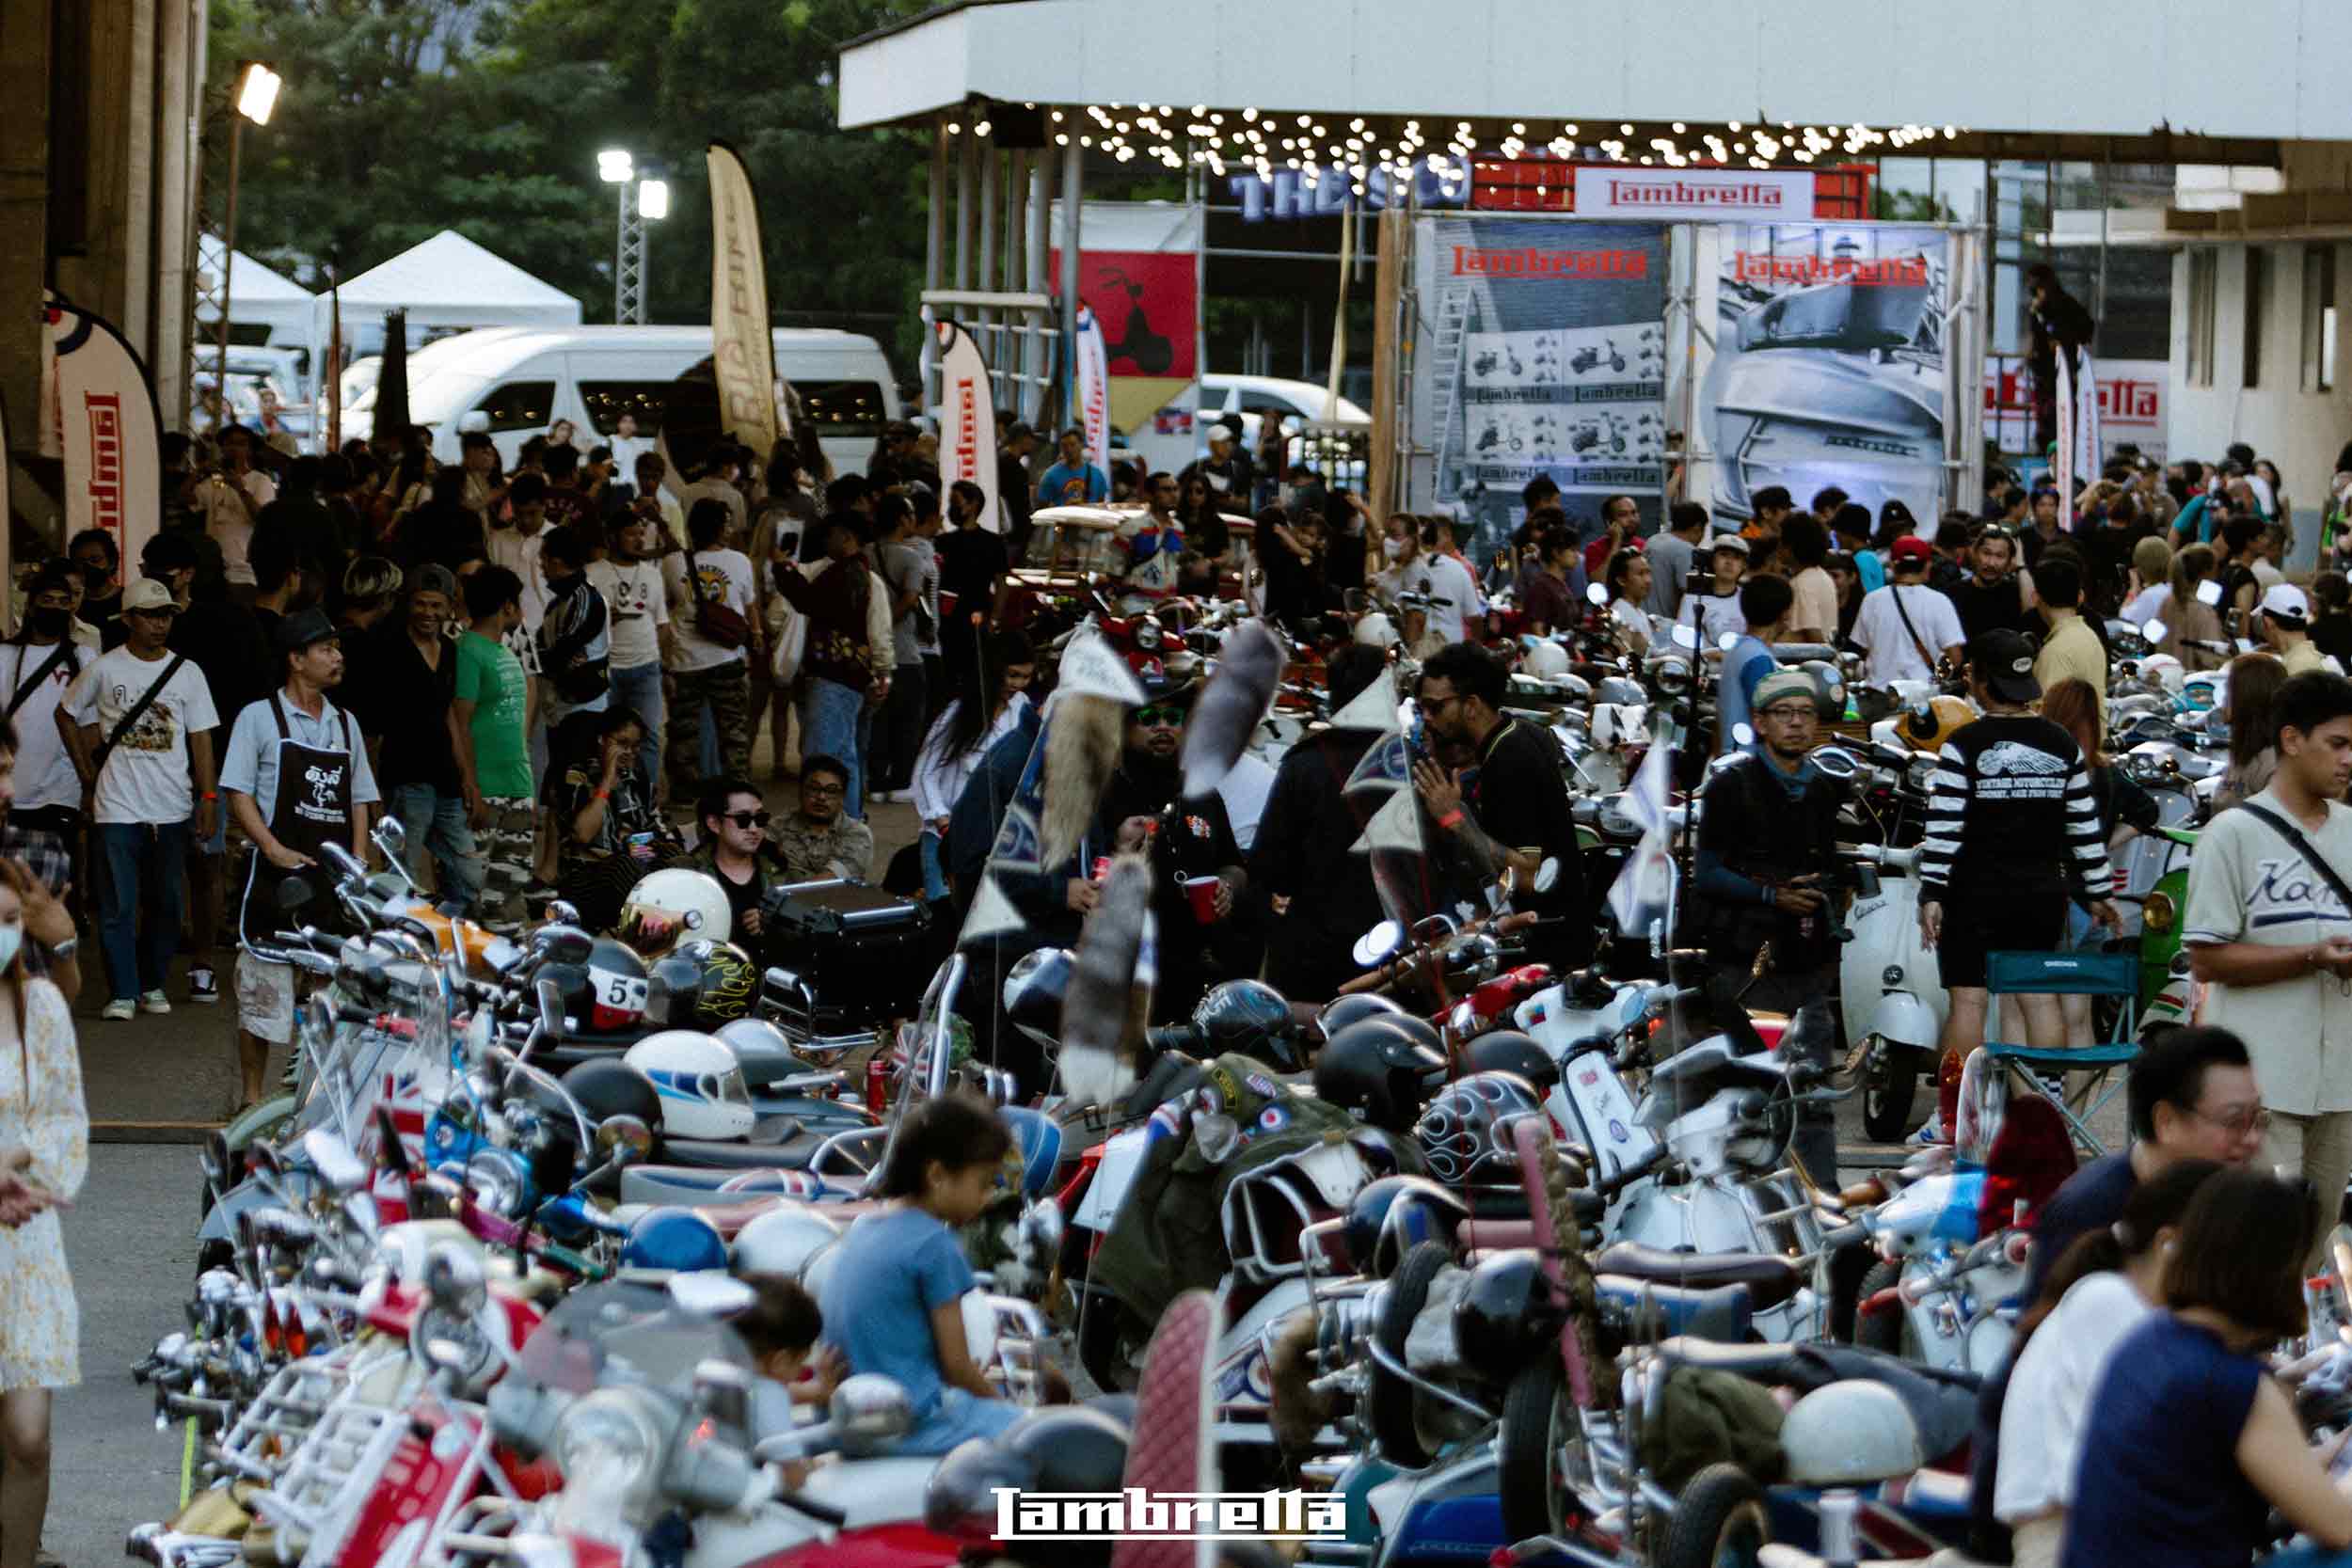 The Scooter Fest 2